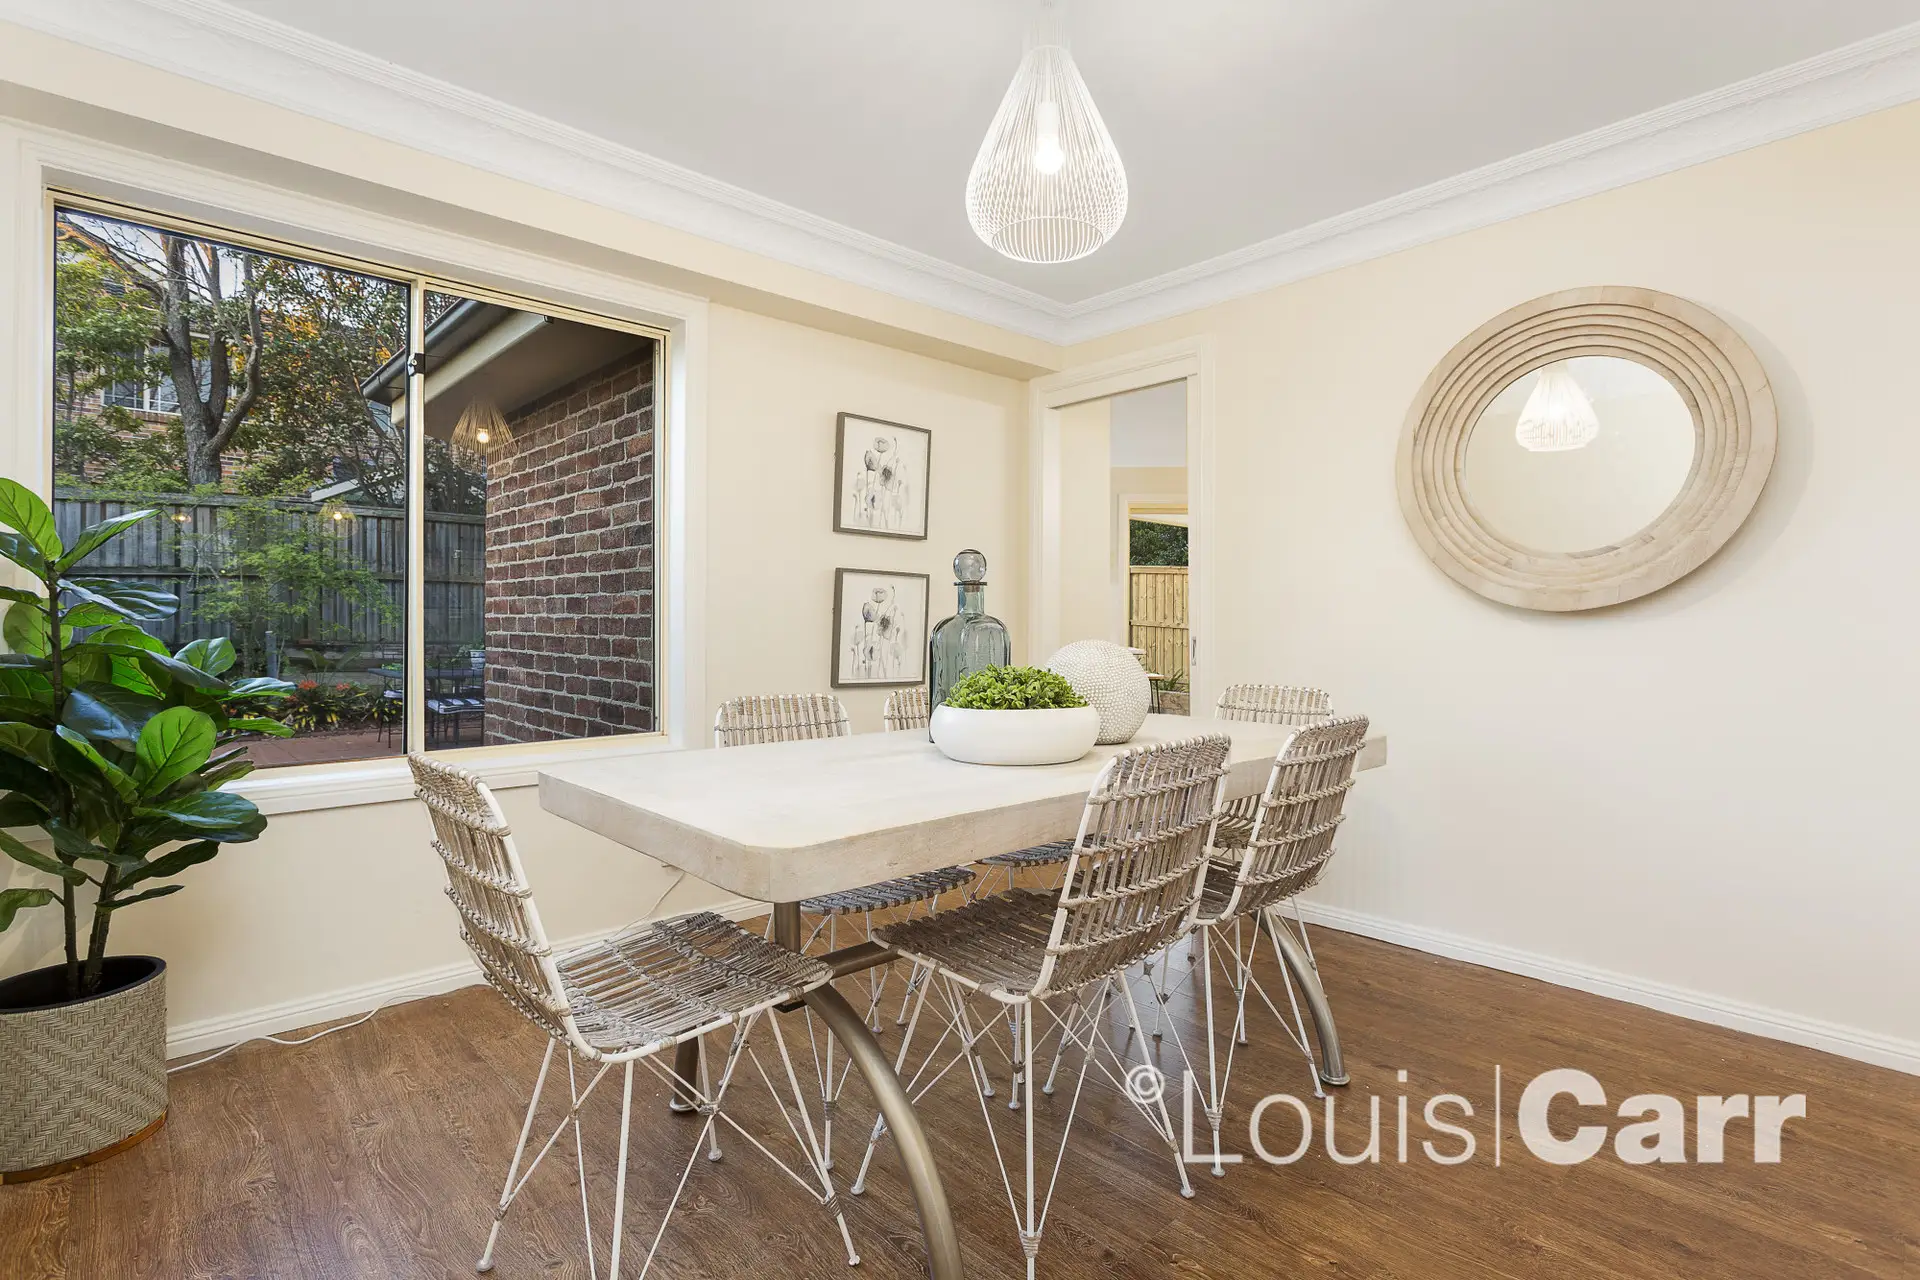 Photo #3: 2/5 Merelynne Avenue, West Pennant Hills - Sold by Louis Carr Real Estate